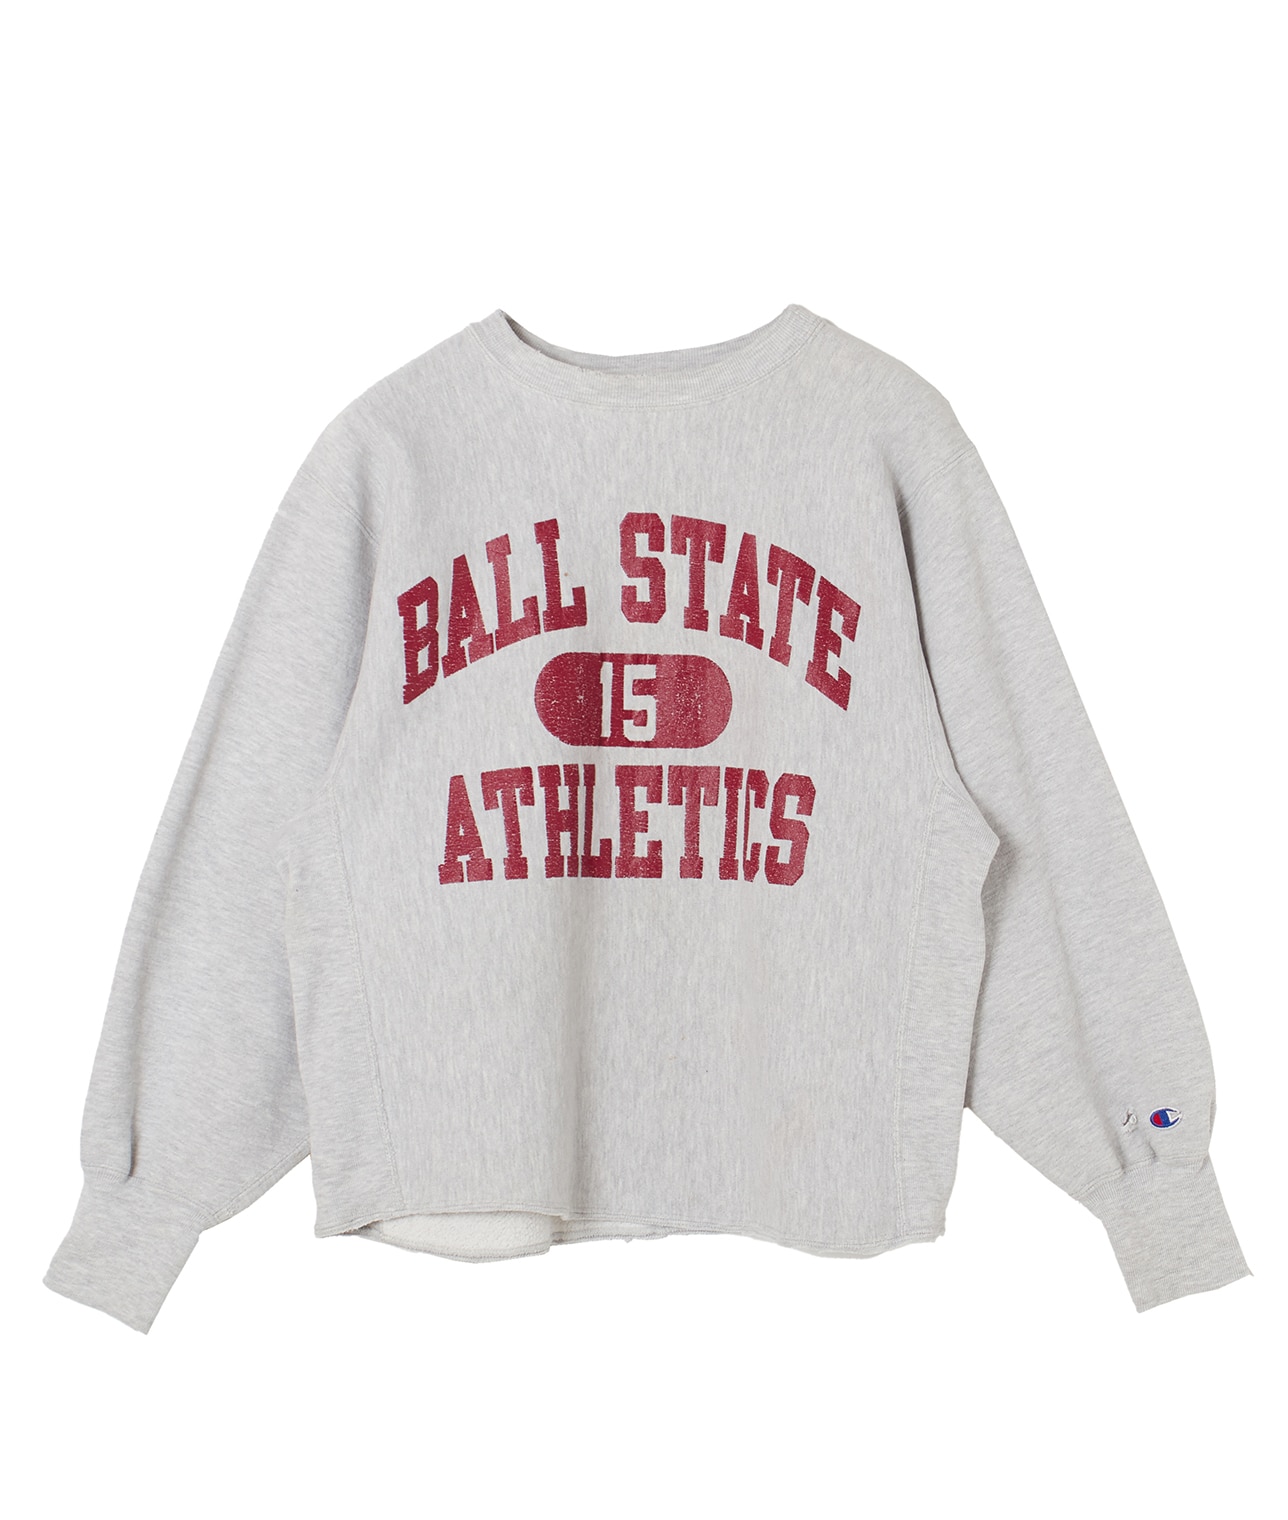 USED/BALL STATE ATHLETICSプリントスウェット 詳細画像 グレー 1